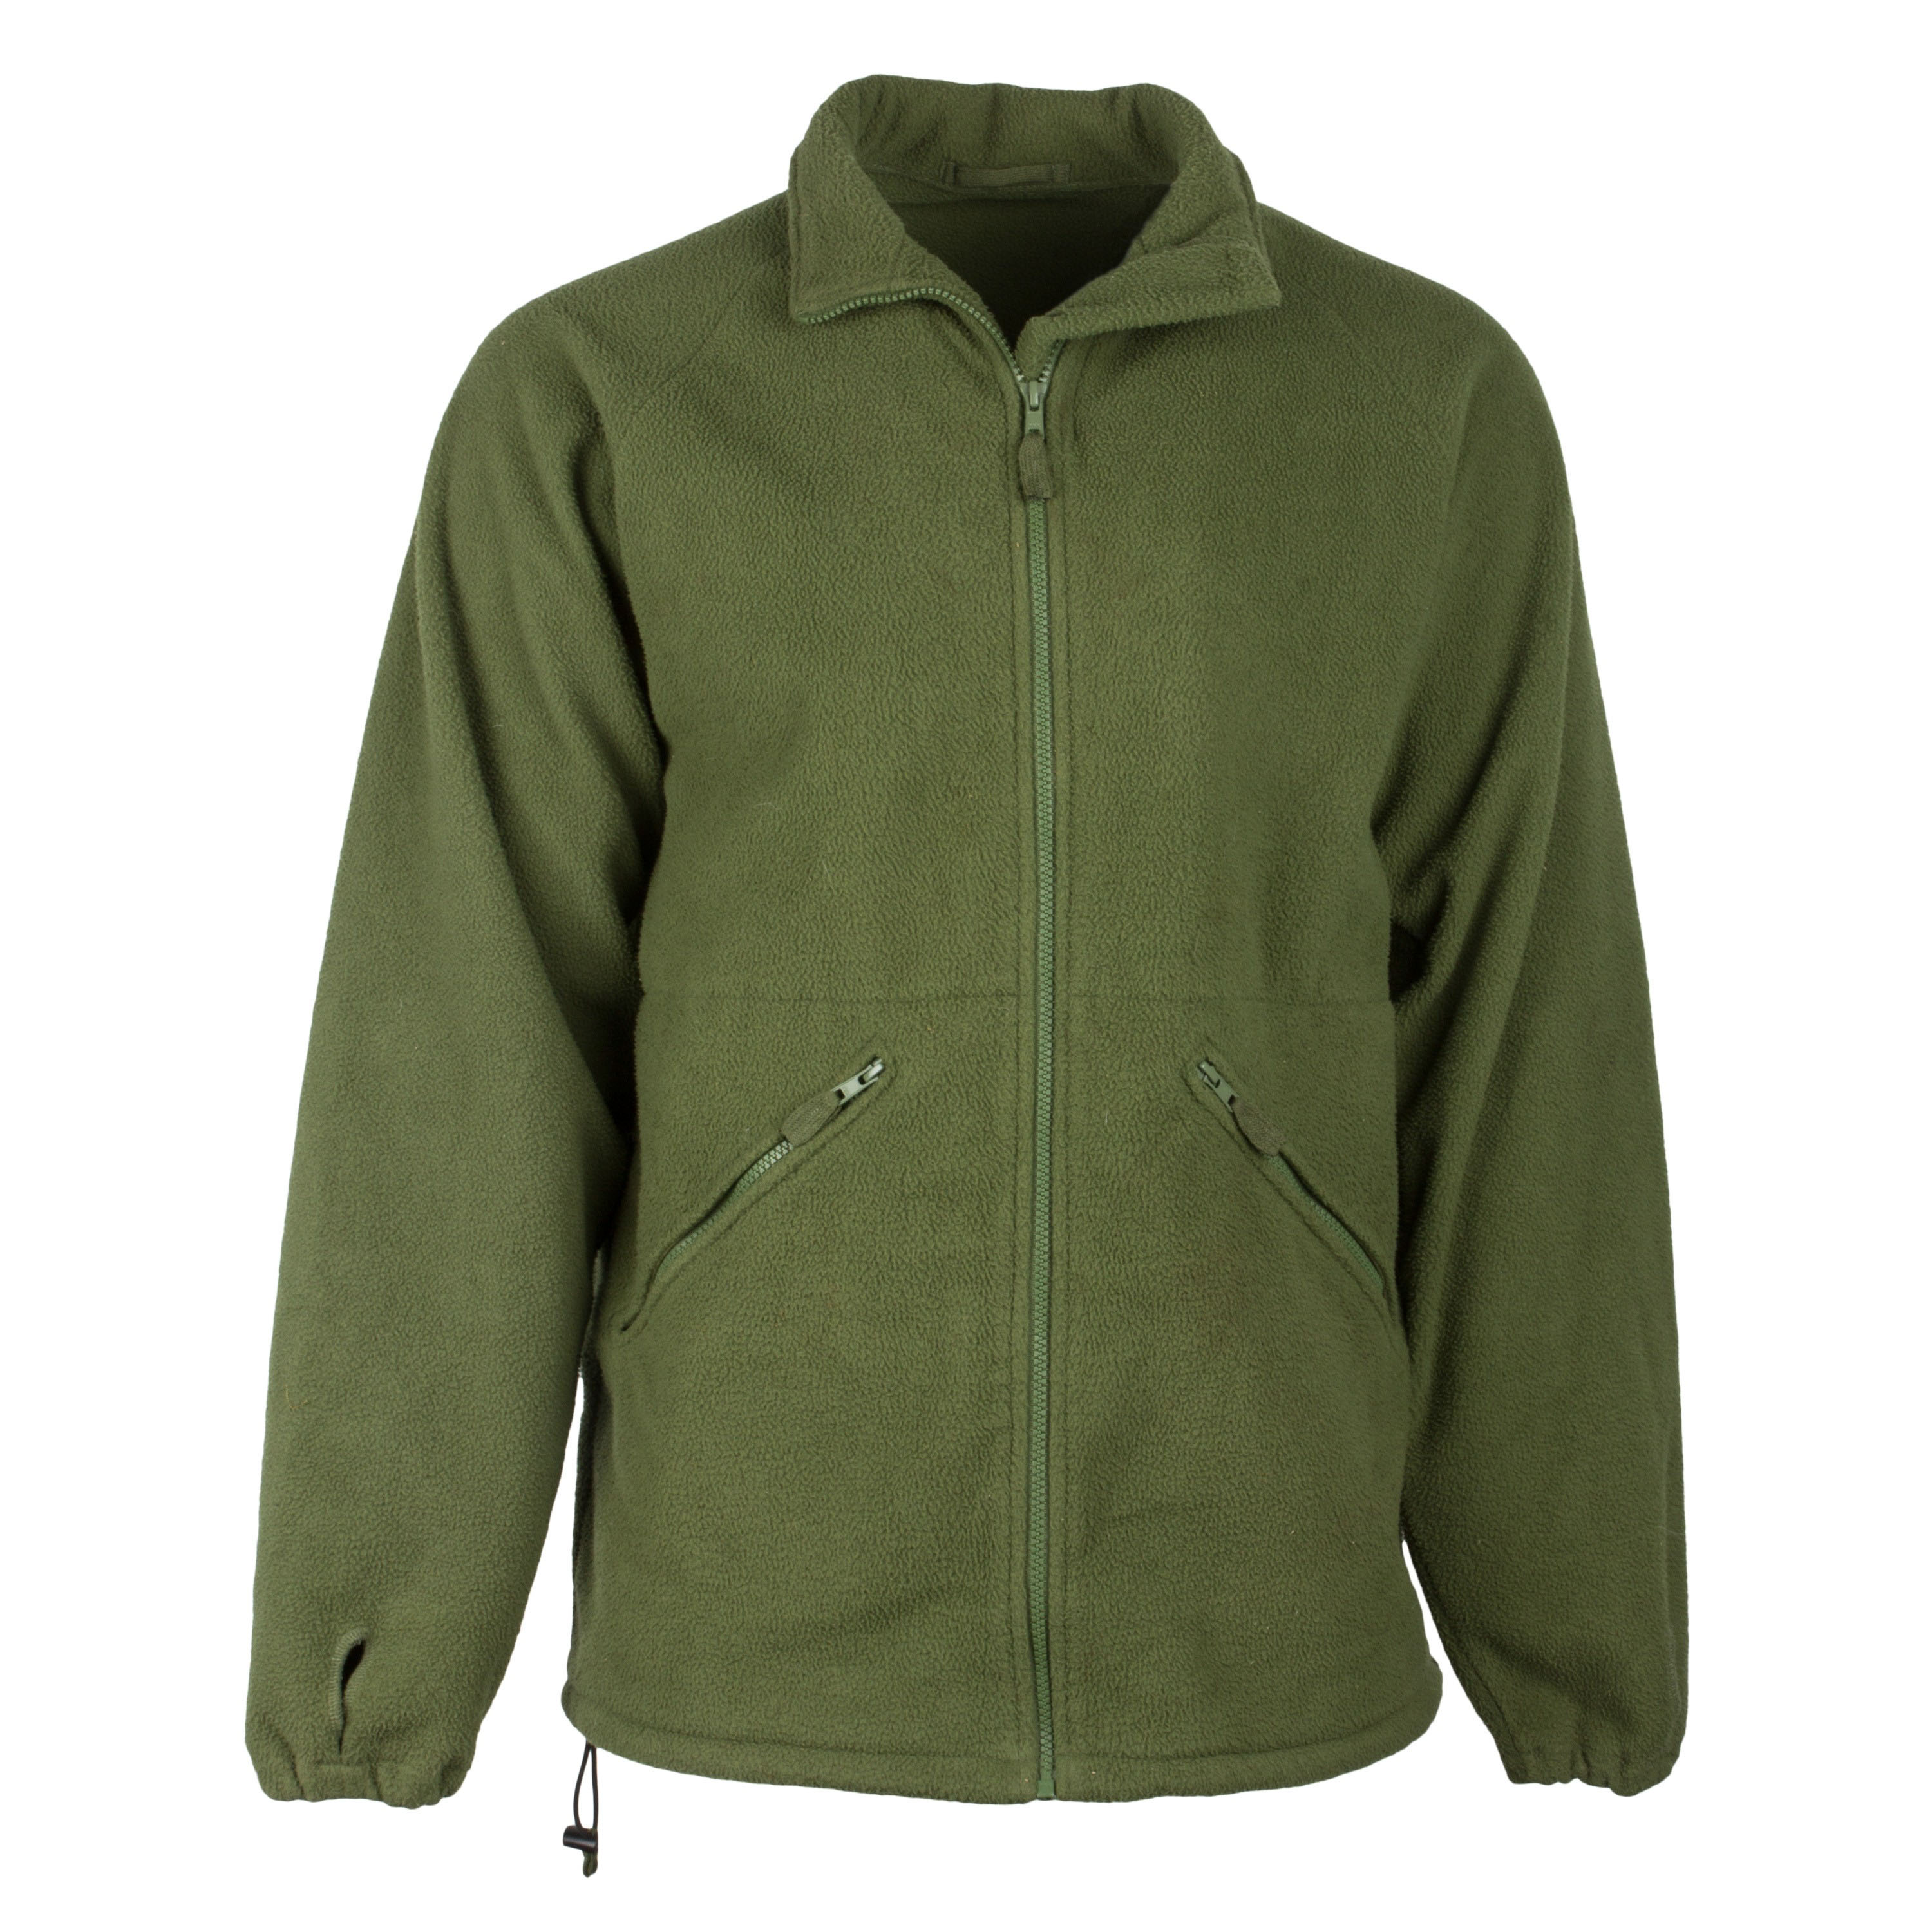 Purchase the British Fleece Jacket Used olive by ASMC